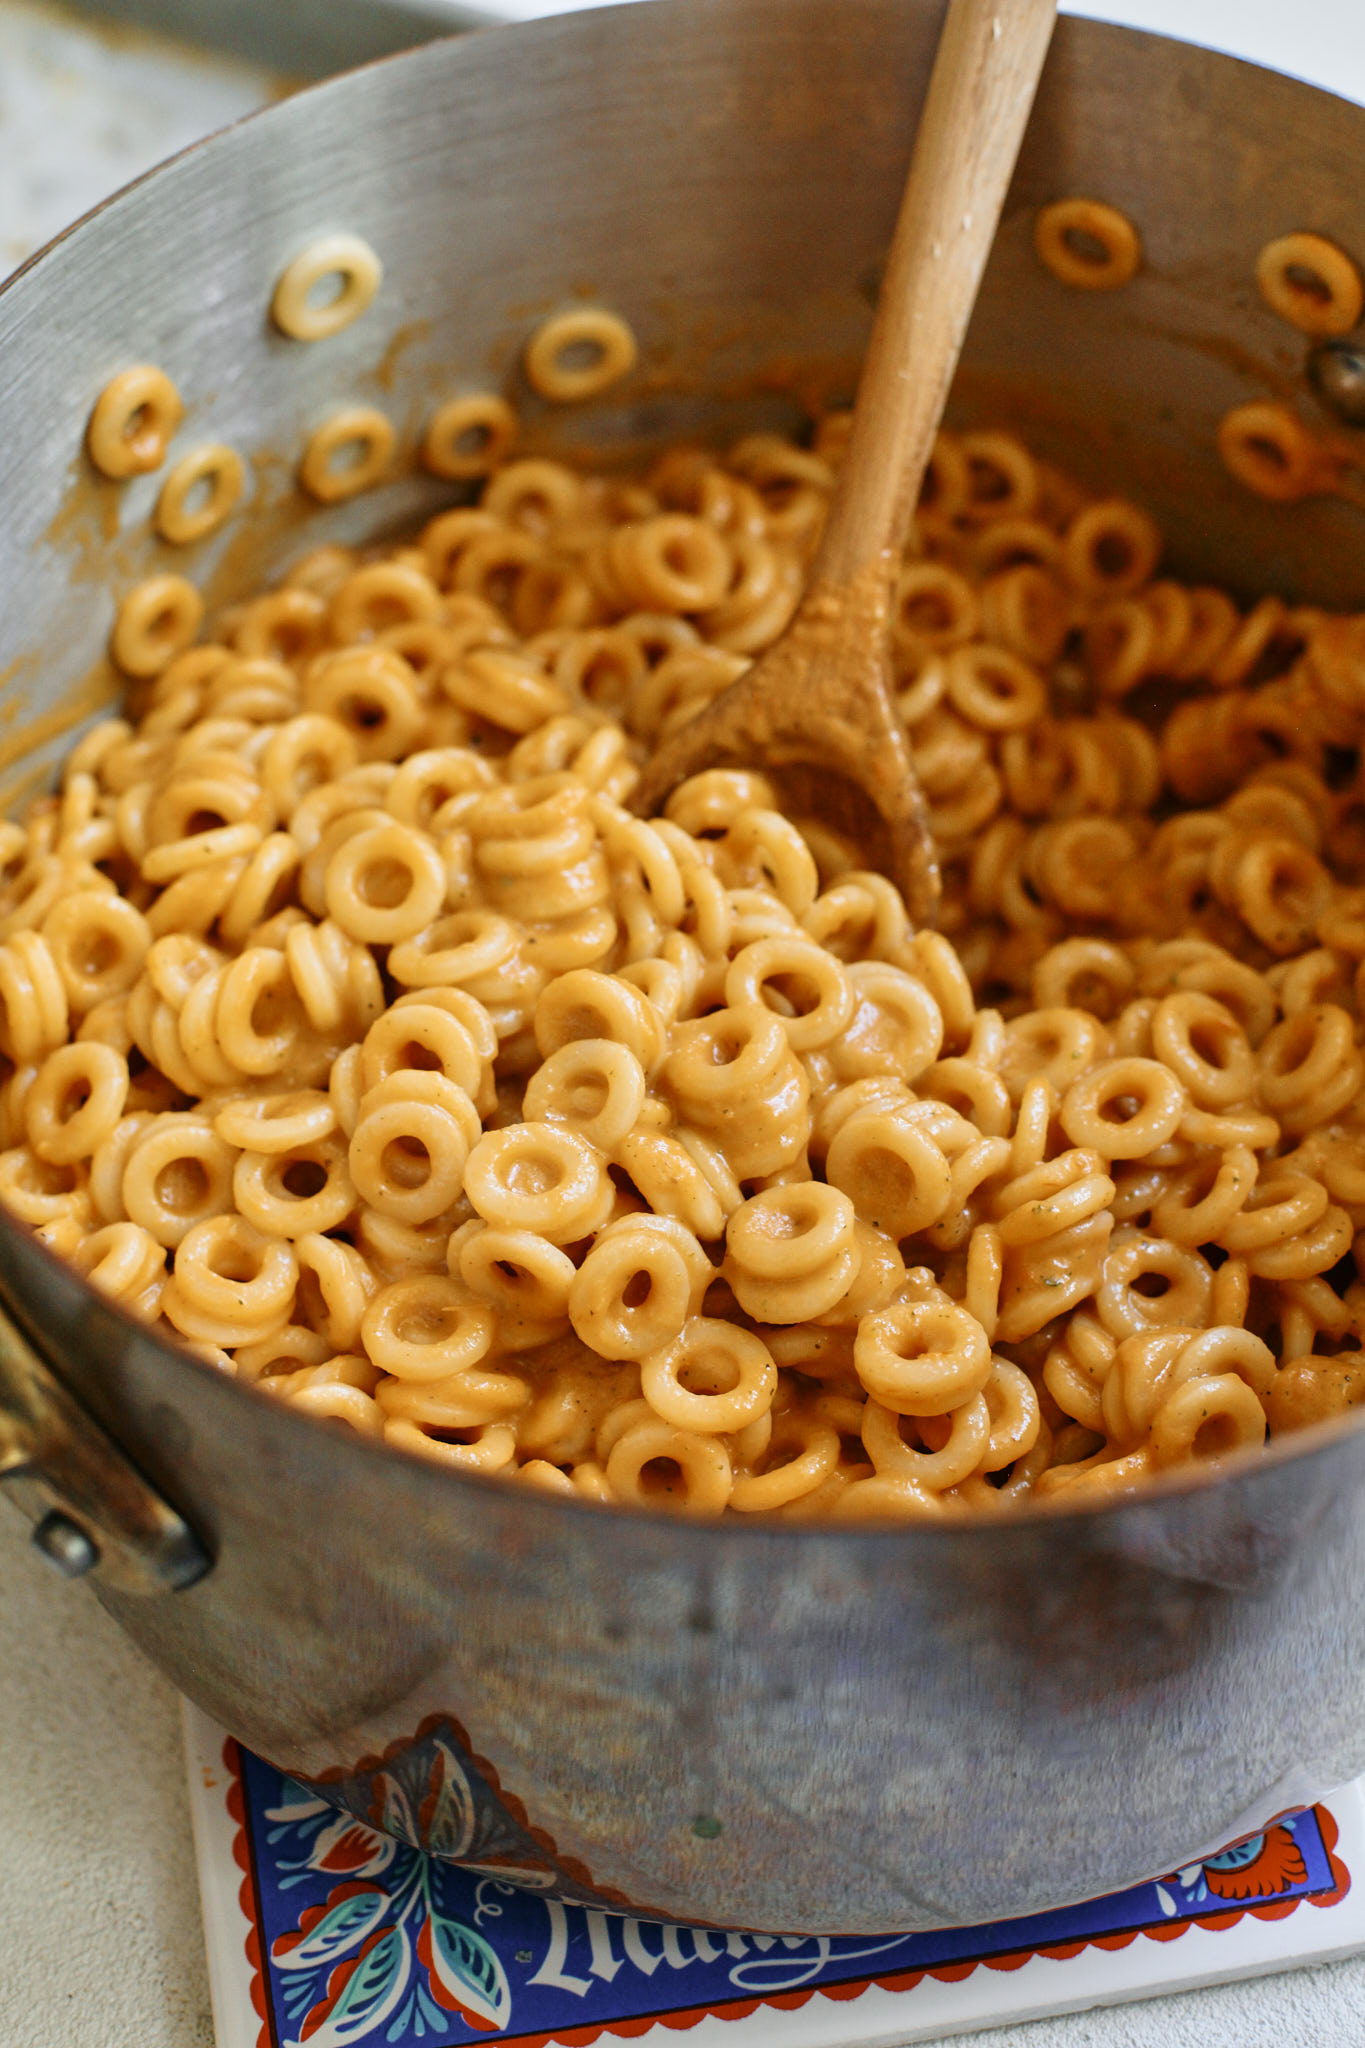 spaghettios mixed with the golden vegetable sauce